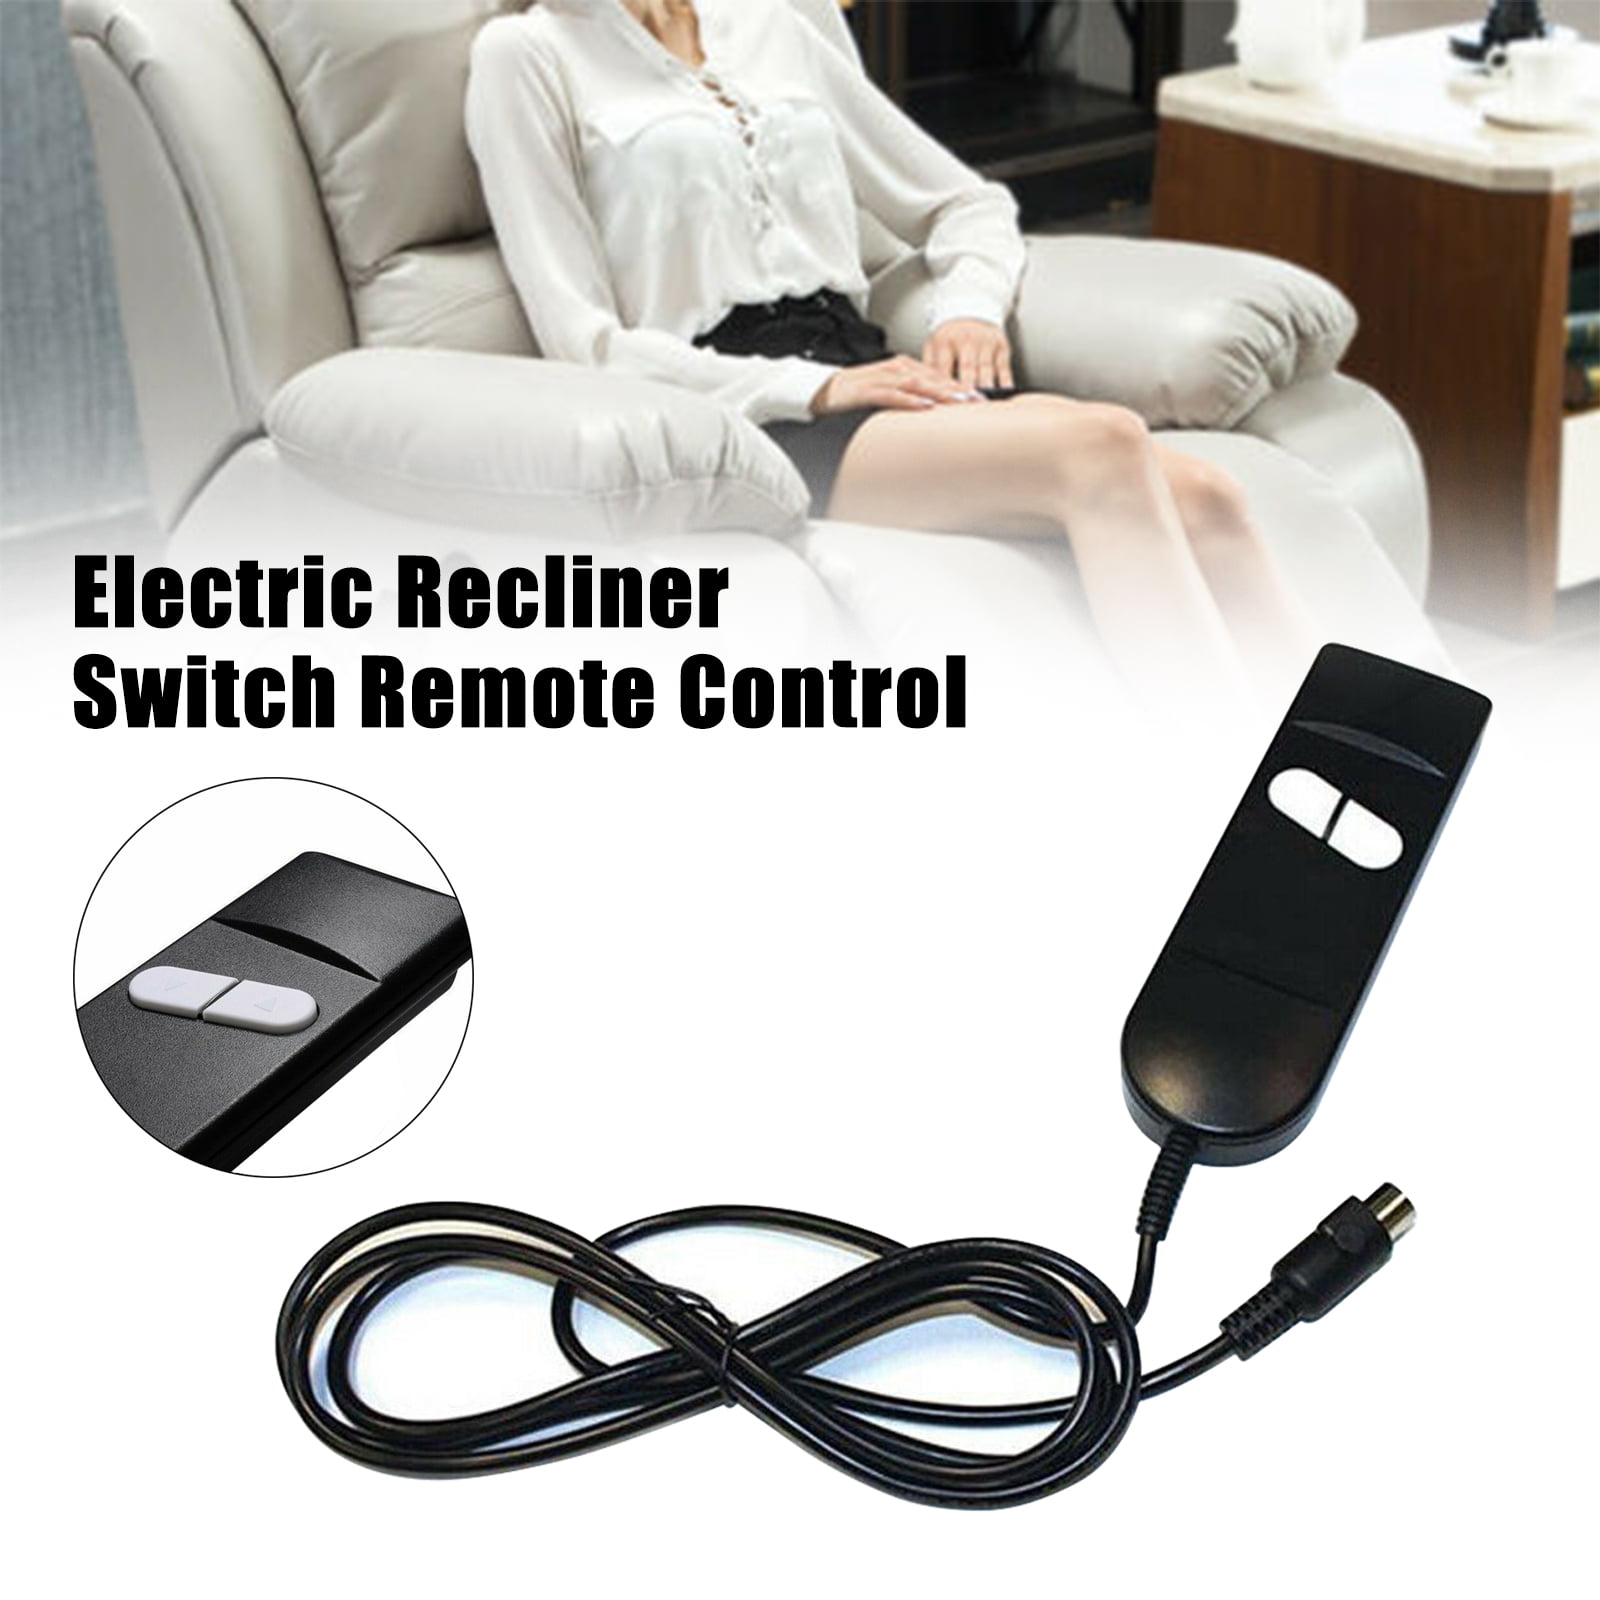 Manual Hand Controller Electric Recliner Controller 4 Button for Lifting Chair Electric Sofa Push Rod Motors Electric Wheelchairs ZGQA-GQA Recliner Hand Control 